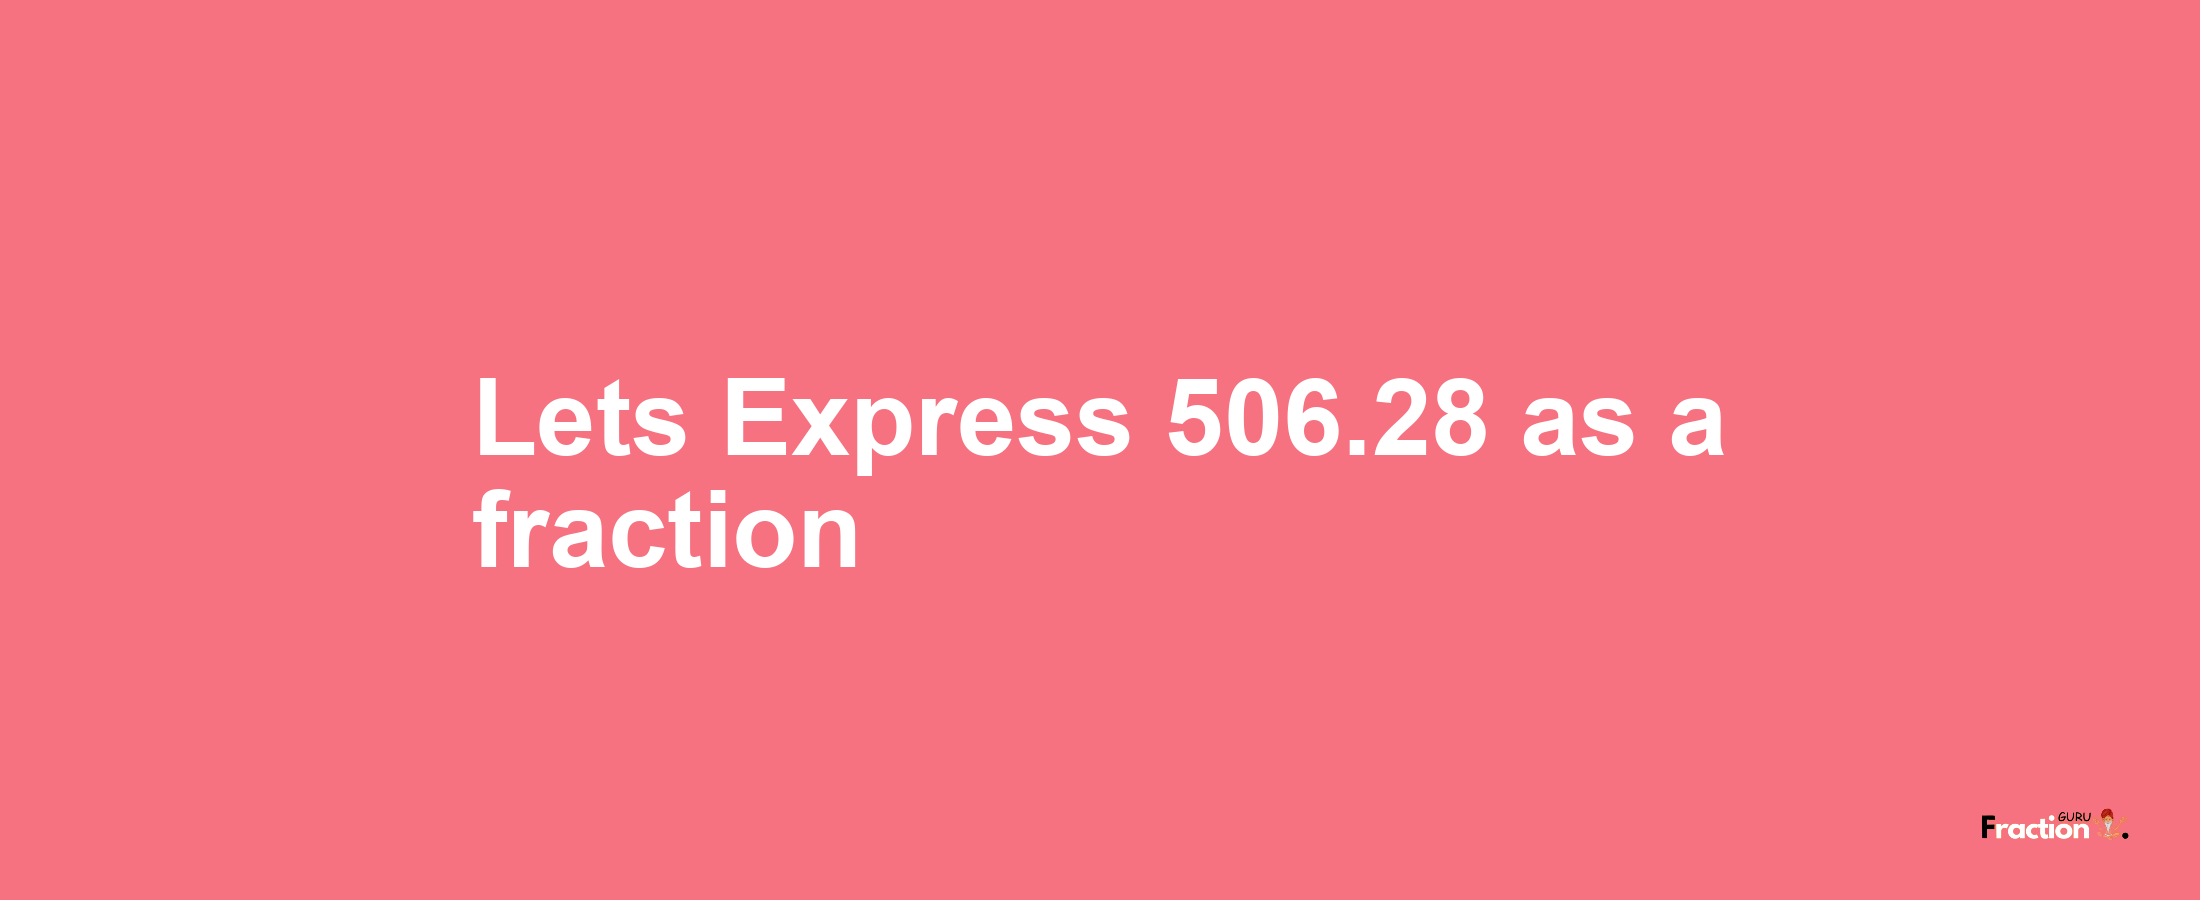 Lets Express 506.28 as afraction